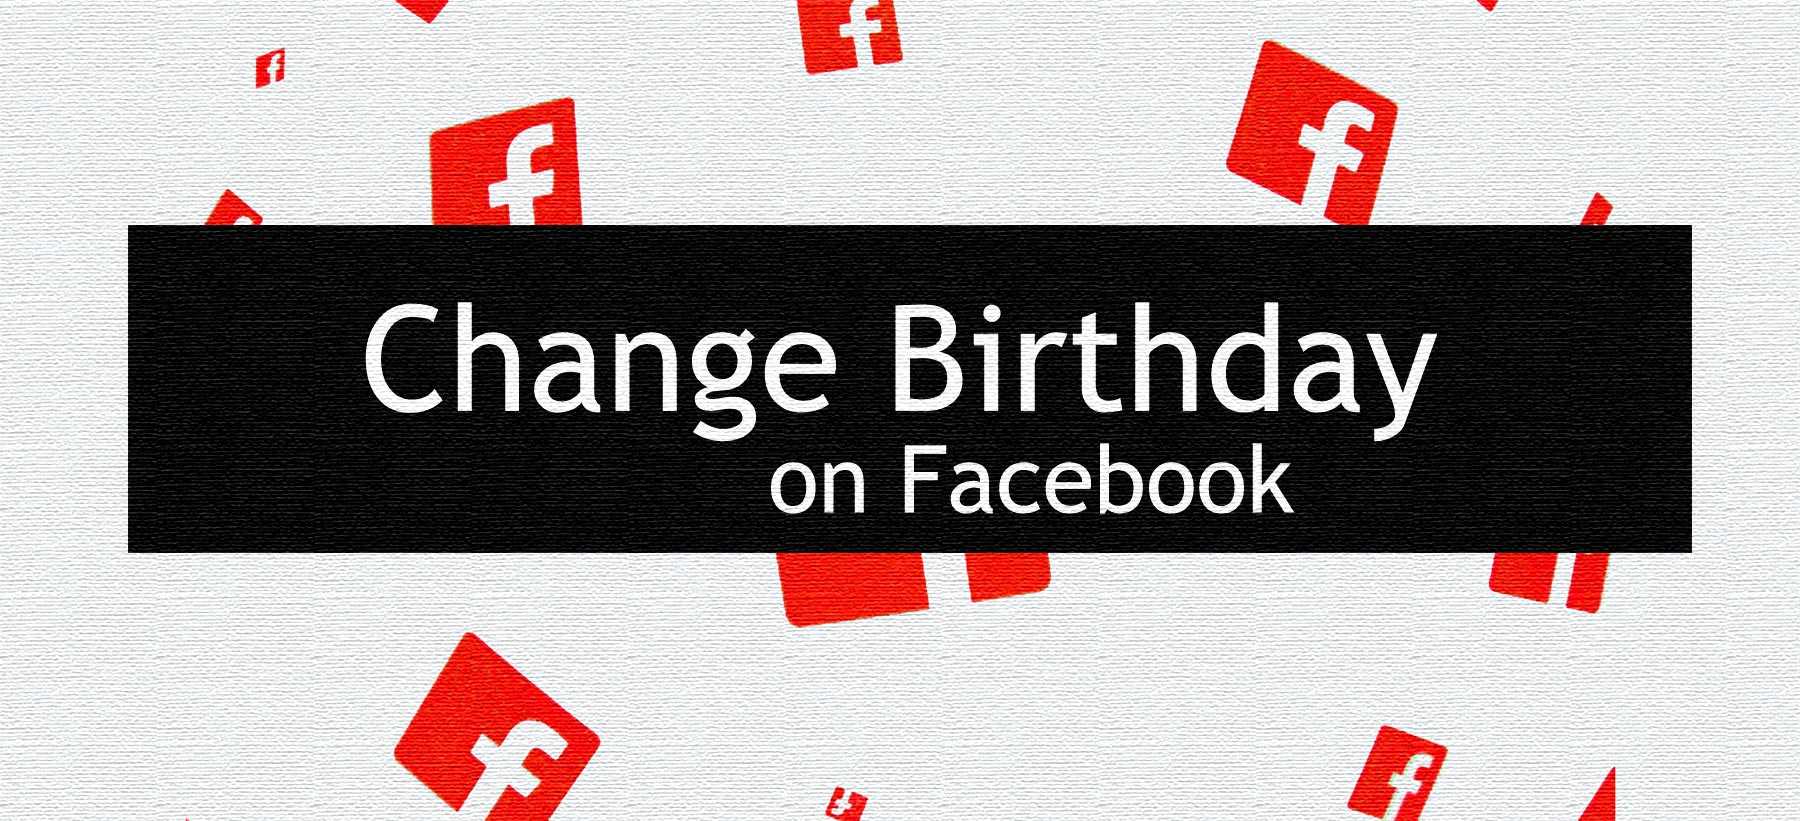 How To Change Birthday On Facebook After Limit